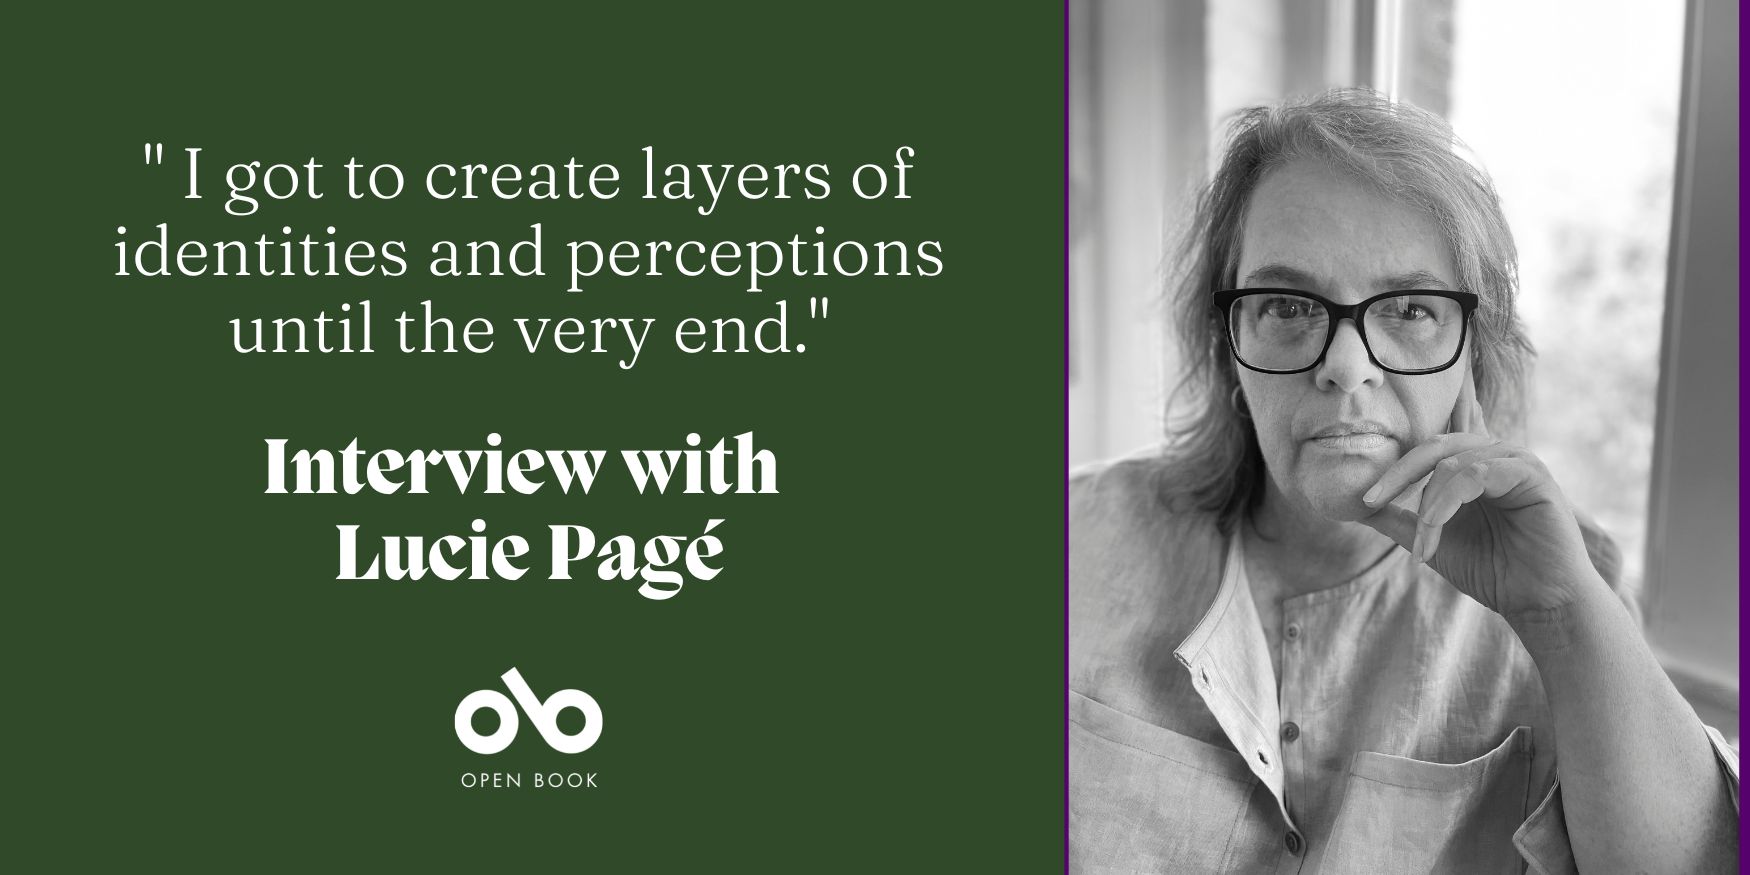 Green background with text "I got to create layers of identities and perceptions until the very end. Interview with Lucie Page" in white text. Photo of author Lucie Page on the right side